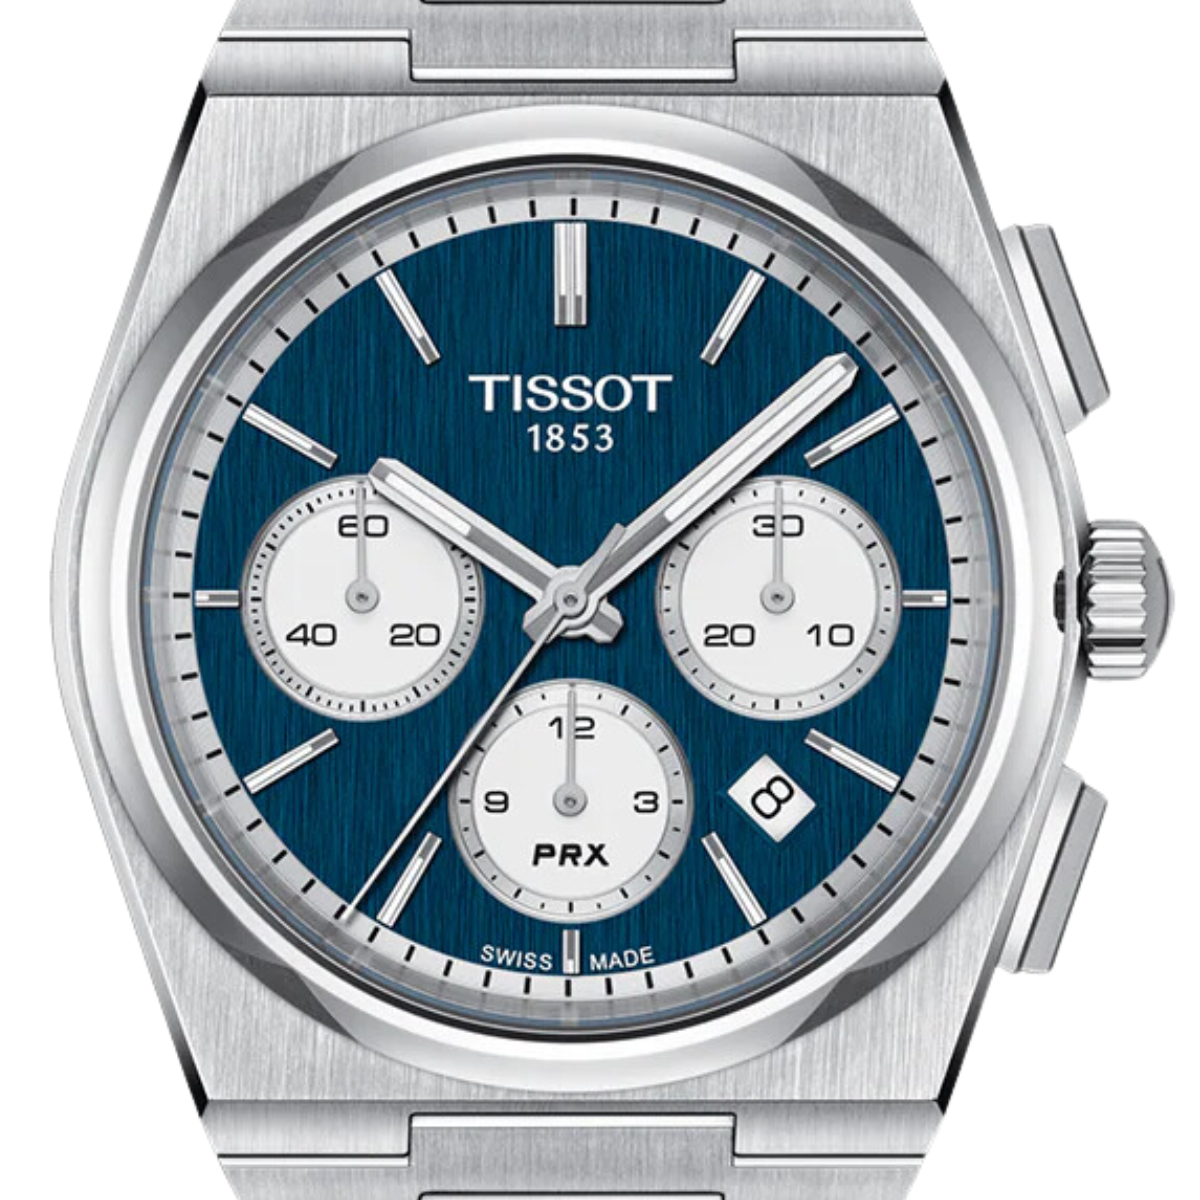 Tissot 1853 PRX T137.427.11.041.00 T1374271104100 Chronograph Automatic Blue Dial Watch - Skywatches